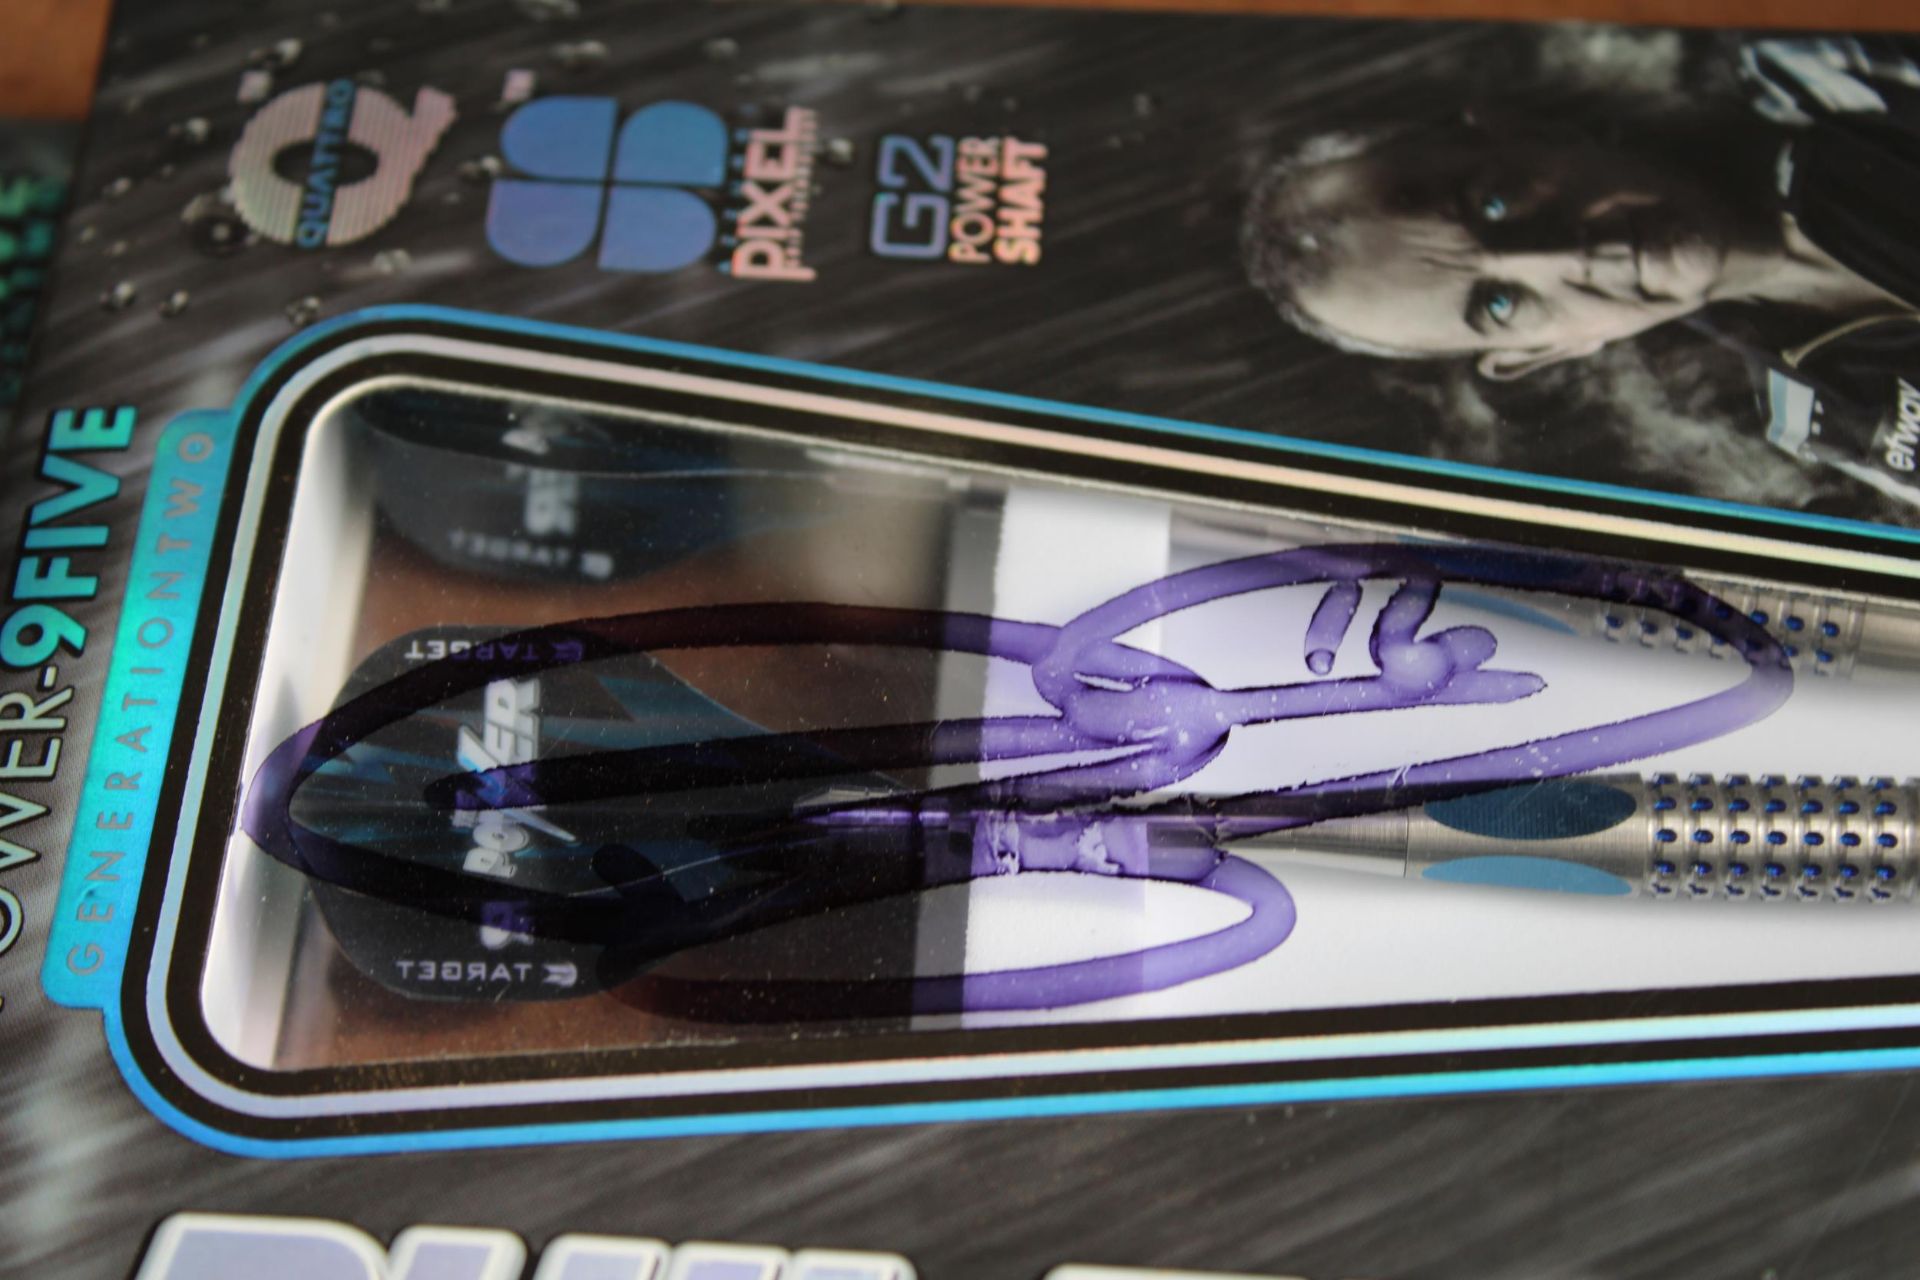 A SET OF BRAND NEW AND BOXED PHIL TAYLOR POWER-9FIVE GENERATION TWO POWER SHAFT 26G 95% TUNGSTEN - Image 3 of 4